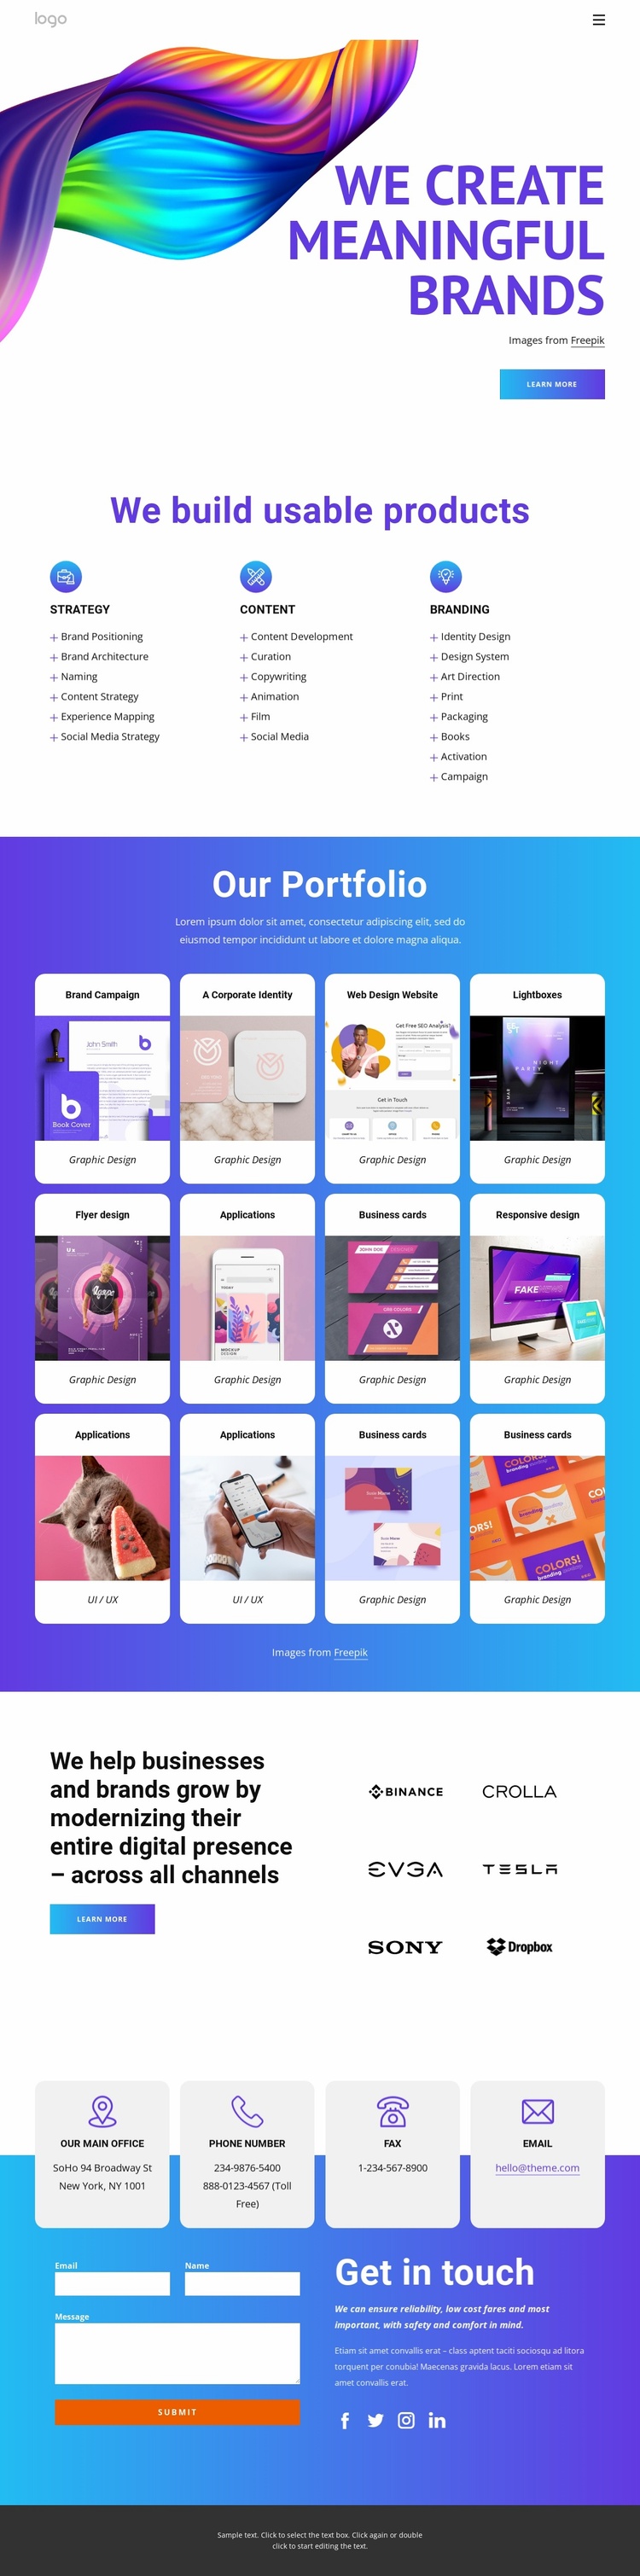 We create meaningful brands eCommerce Template